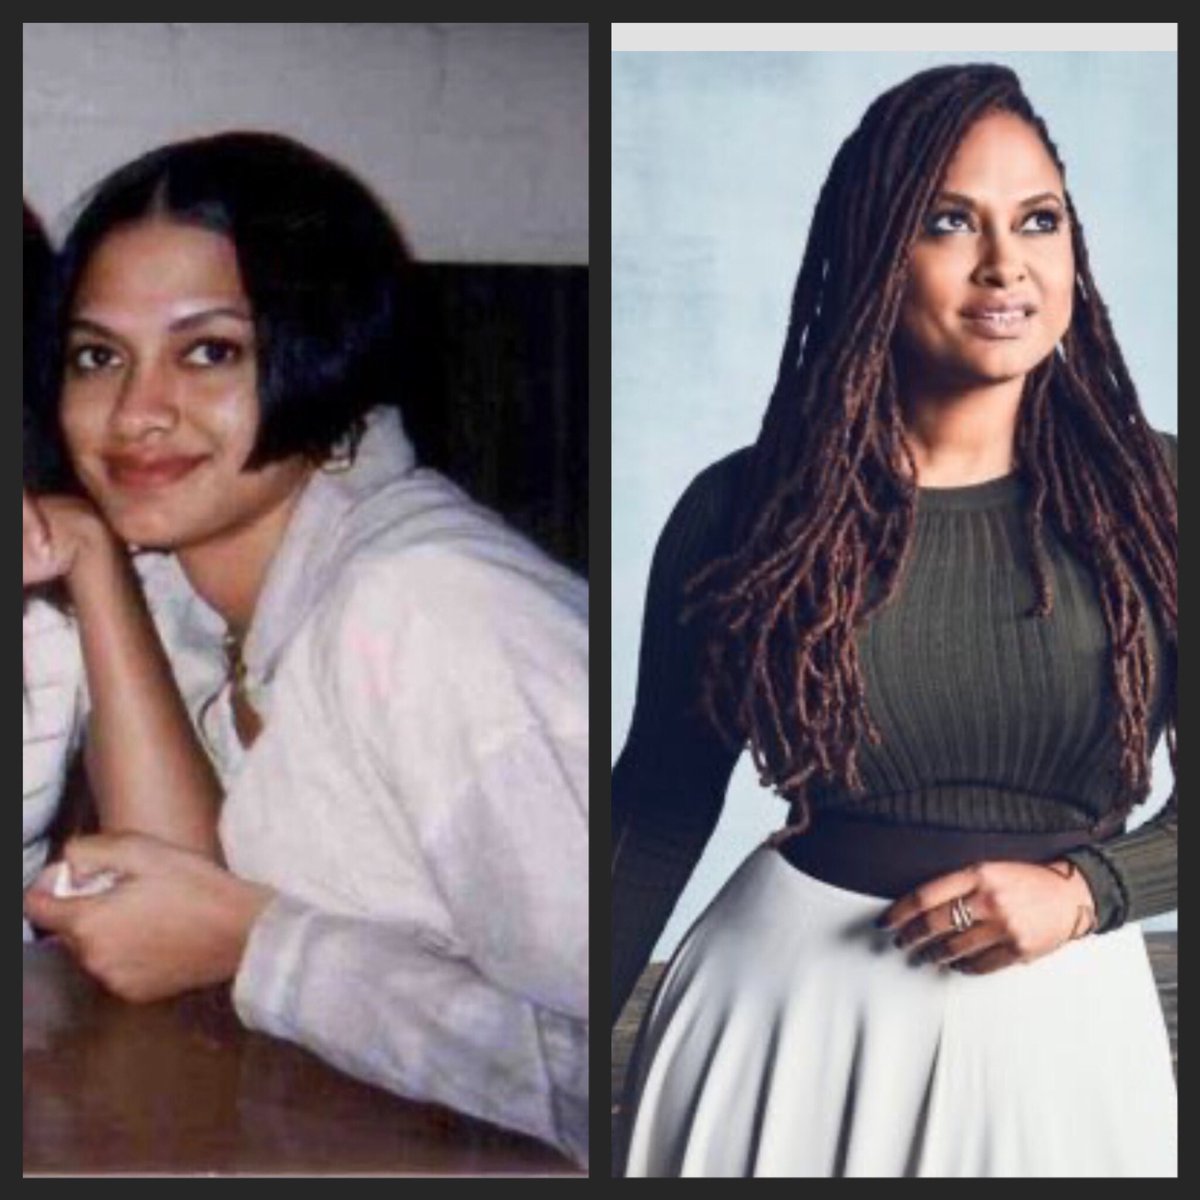  @ava (Ava Duvernay) is an American filmmaker. Duvernay who was born in Long Beach, CA, was the first Black woman to win the directing award at Sundance (2012). She is most known for these works: Selma; When They See Us; The 13th, Queen Sugar and more. #BHM    #BlackHerstory